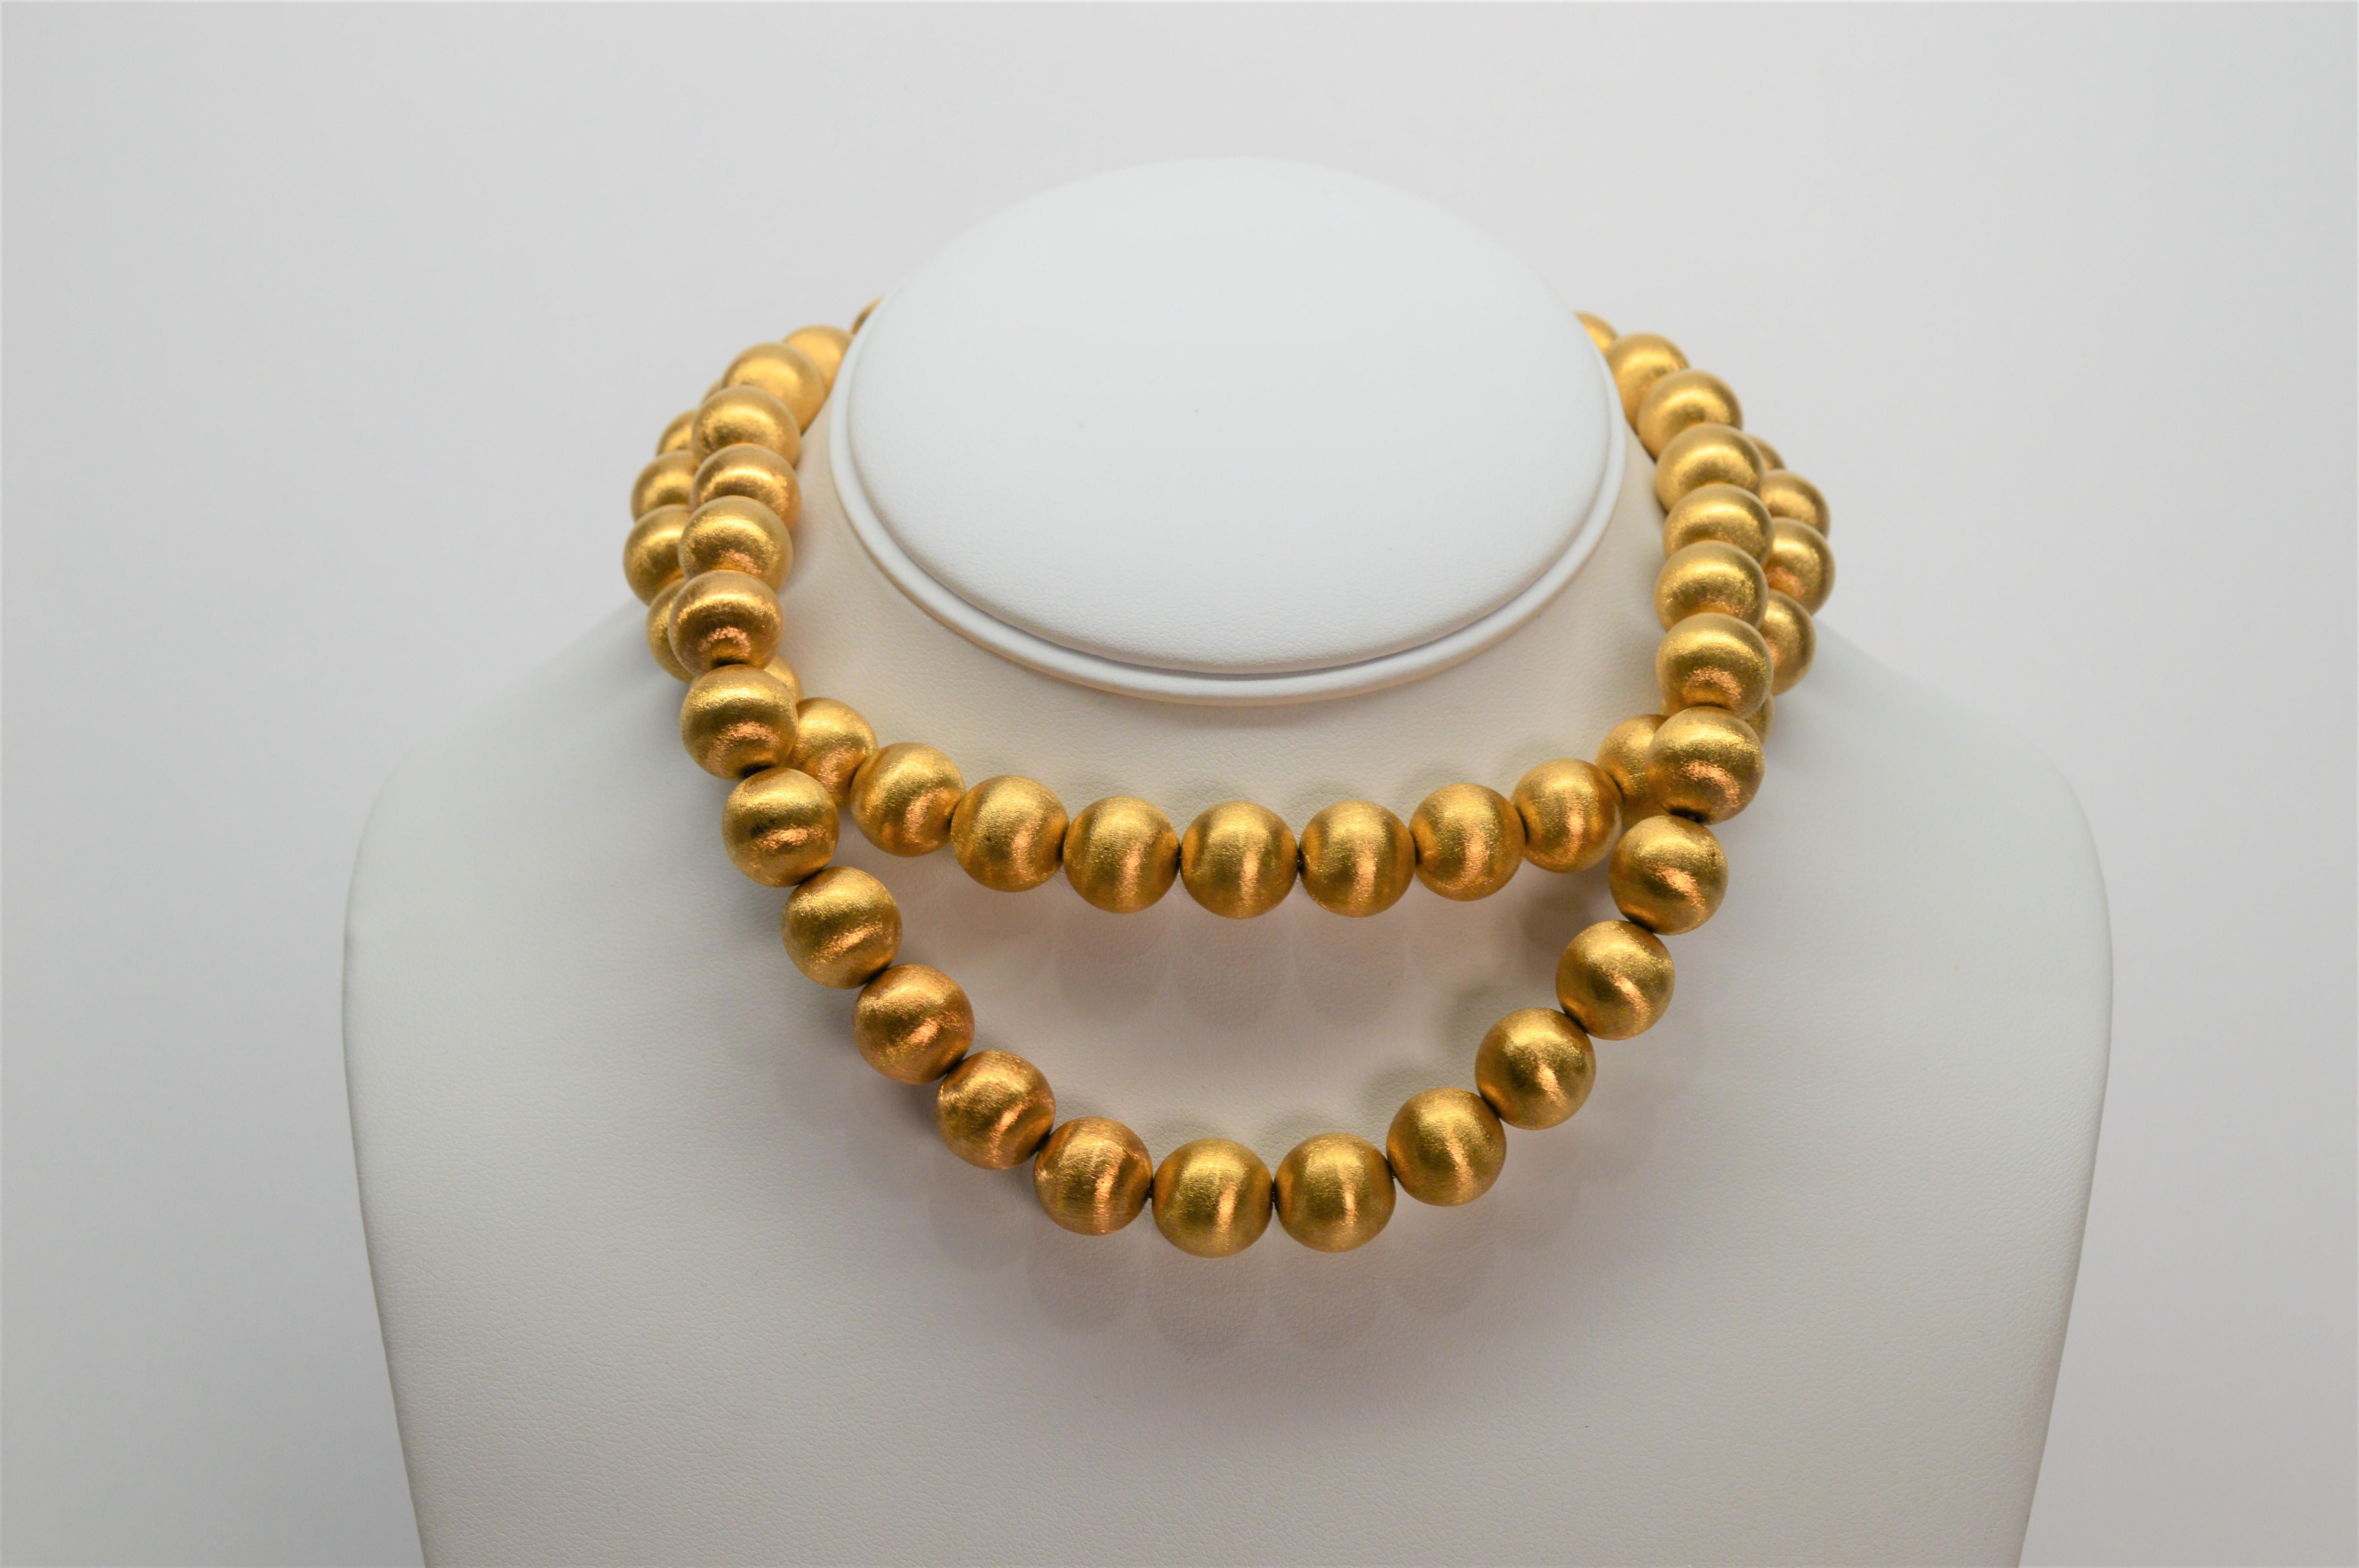 Circa 1950's, extremely fine and a rare find in mint condition, this glamorous necklace and earring set is a showstopper. Sixty-four 11.88mm brushed eighteen karat (18K) gold beads create this glorious 28 inch strand. Complimented by 15 mm matching